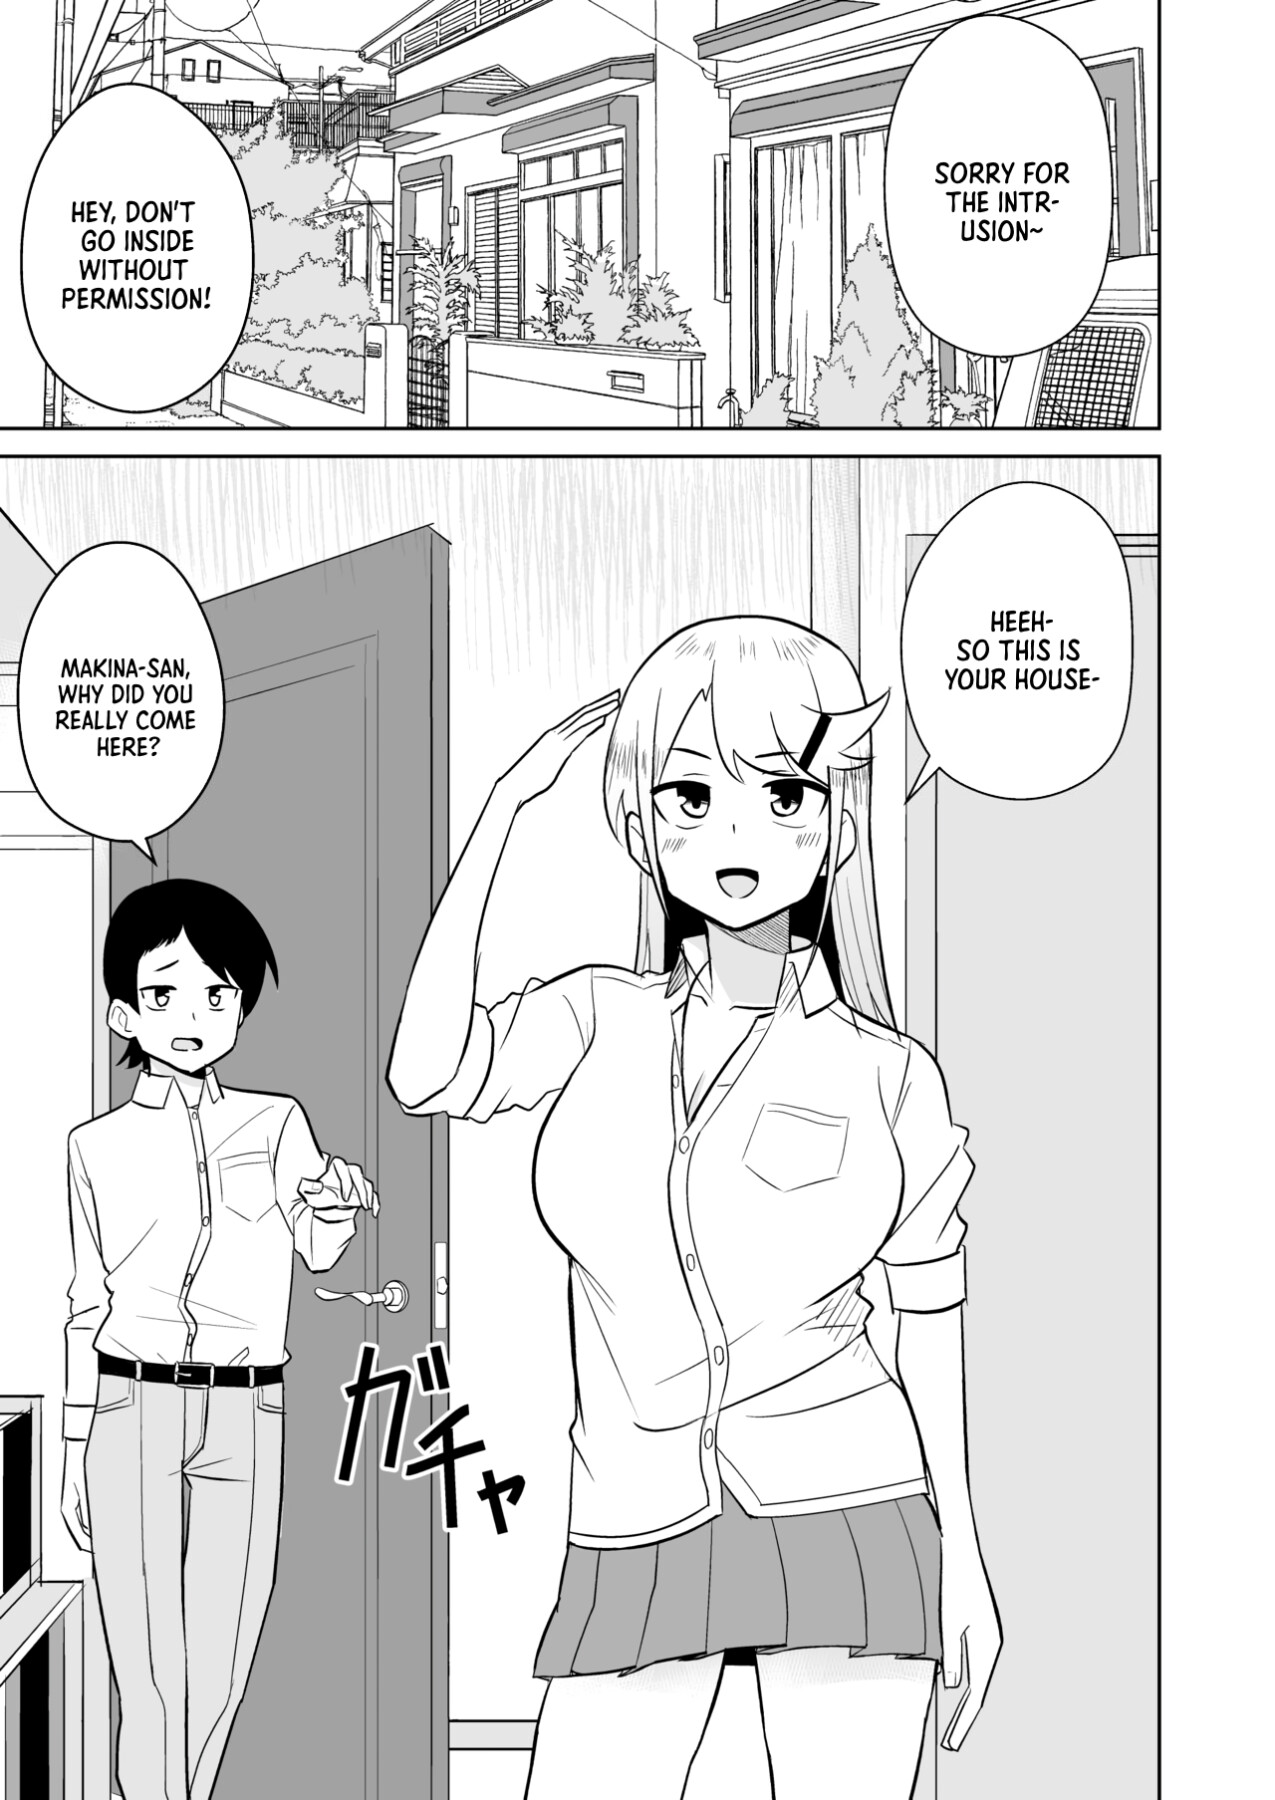 Hentai Manga Comic-A Story About a Gal coming To My House-Read-2